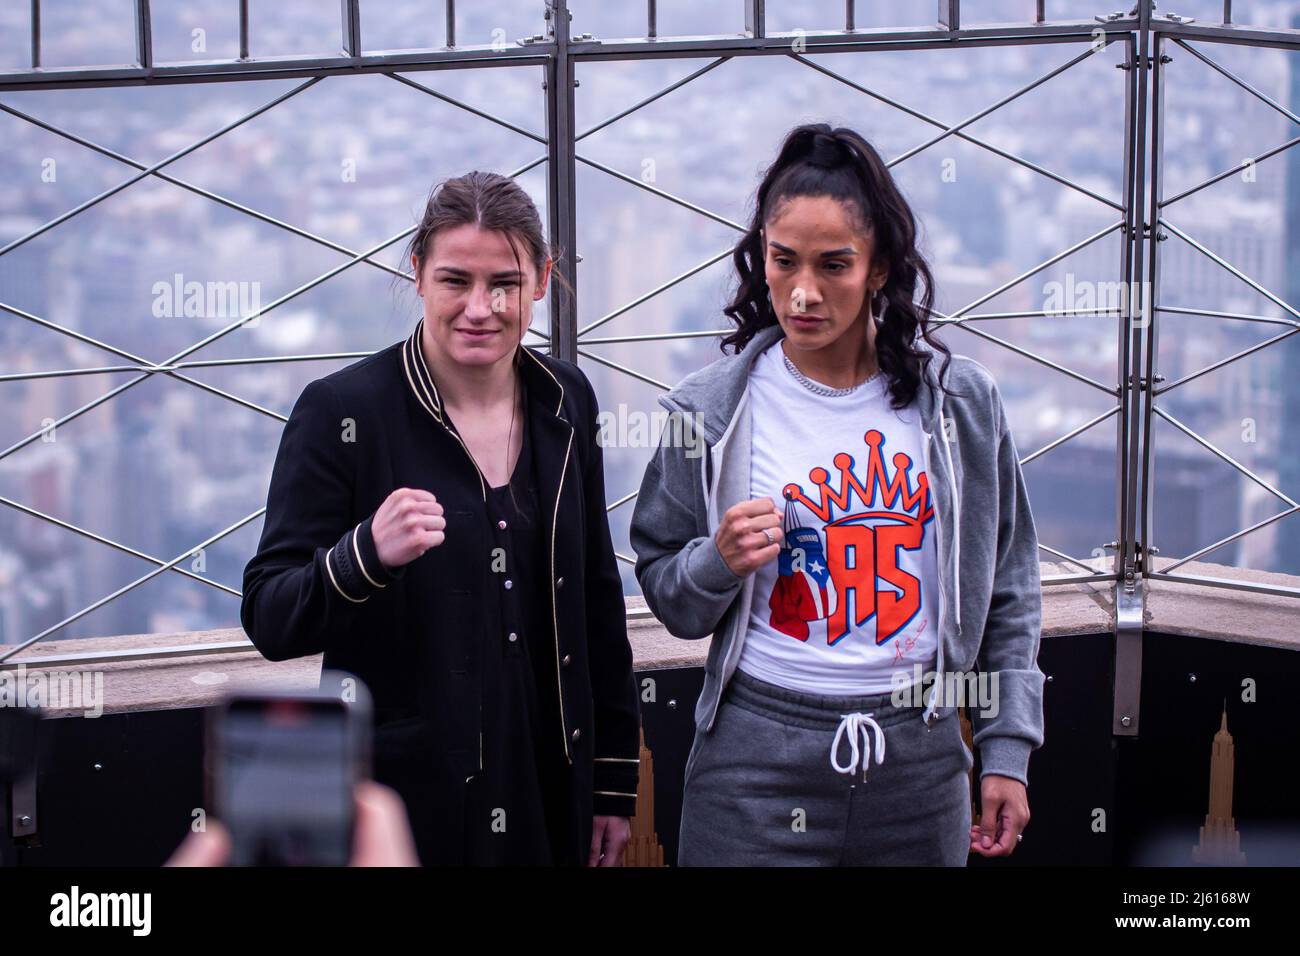 NEW YORK, NY - APRIL 26: (L-R) Katie Taylor and Amanda Serrano face off ahead of their Undisputed Title Fight on Saturday night (April 30) at Madison Square Garden on April 26, 2022 in New York, NY, United States. (Photo by Matt Davies/PxImages) Credit: Px Images/Alamy Live News Stock Photo